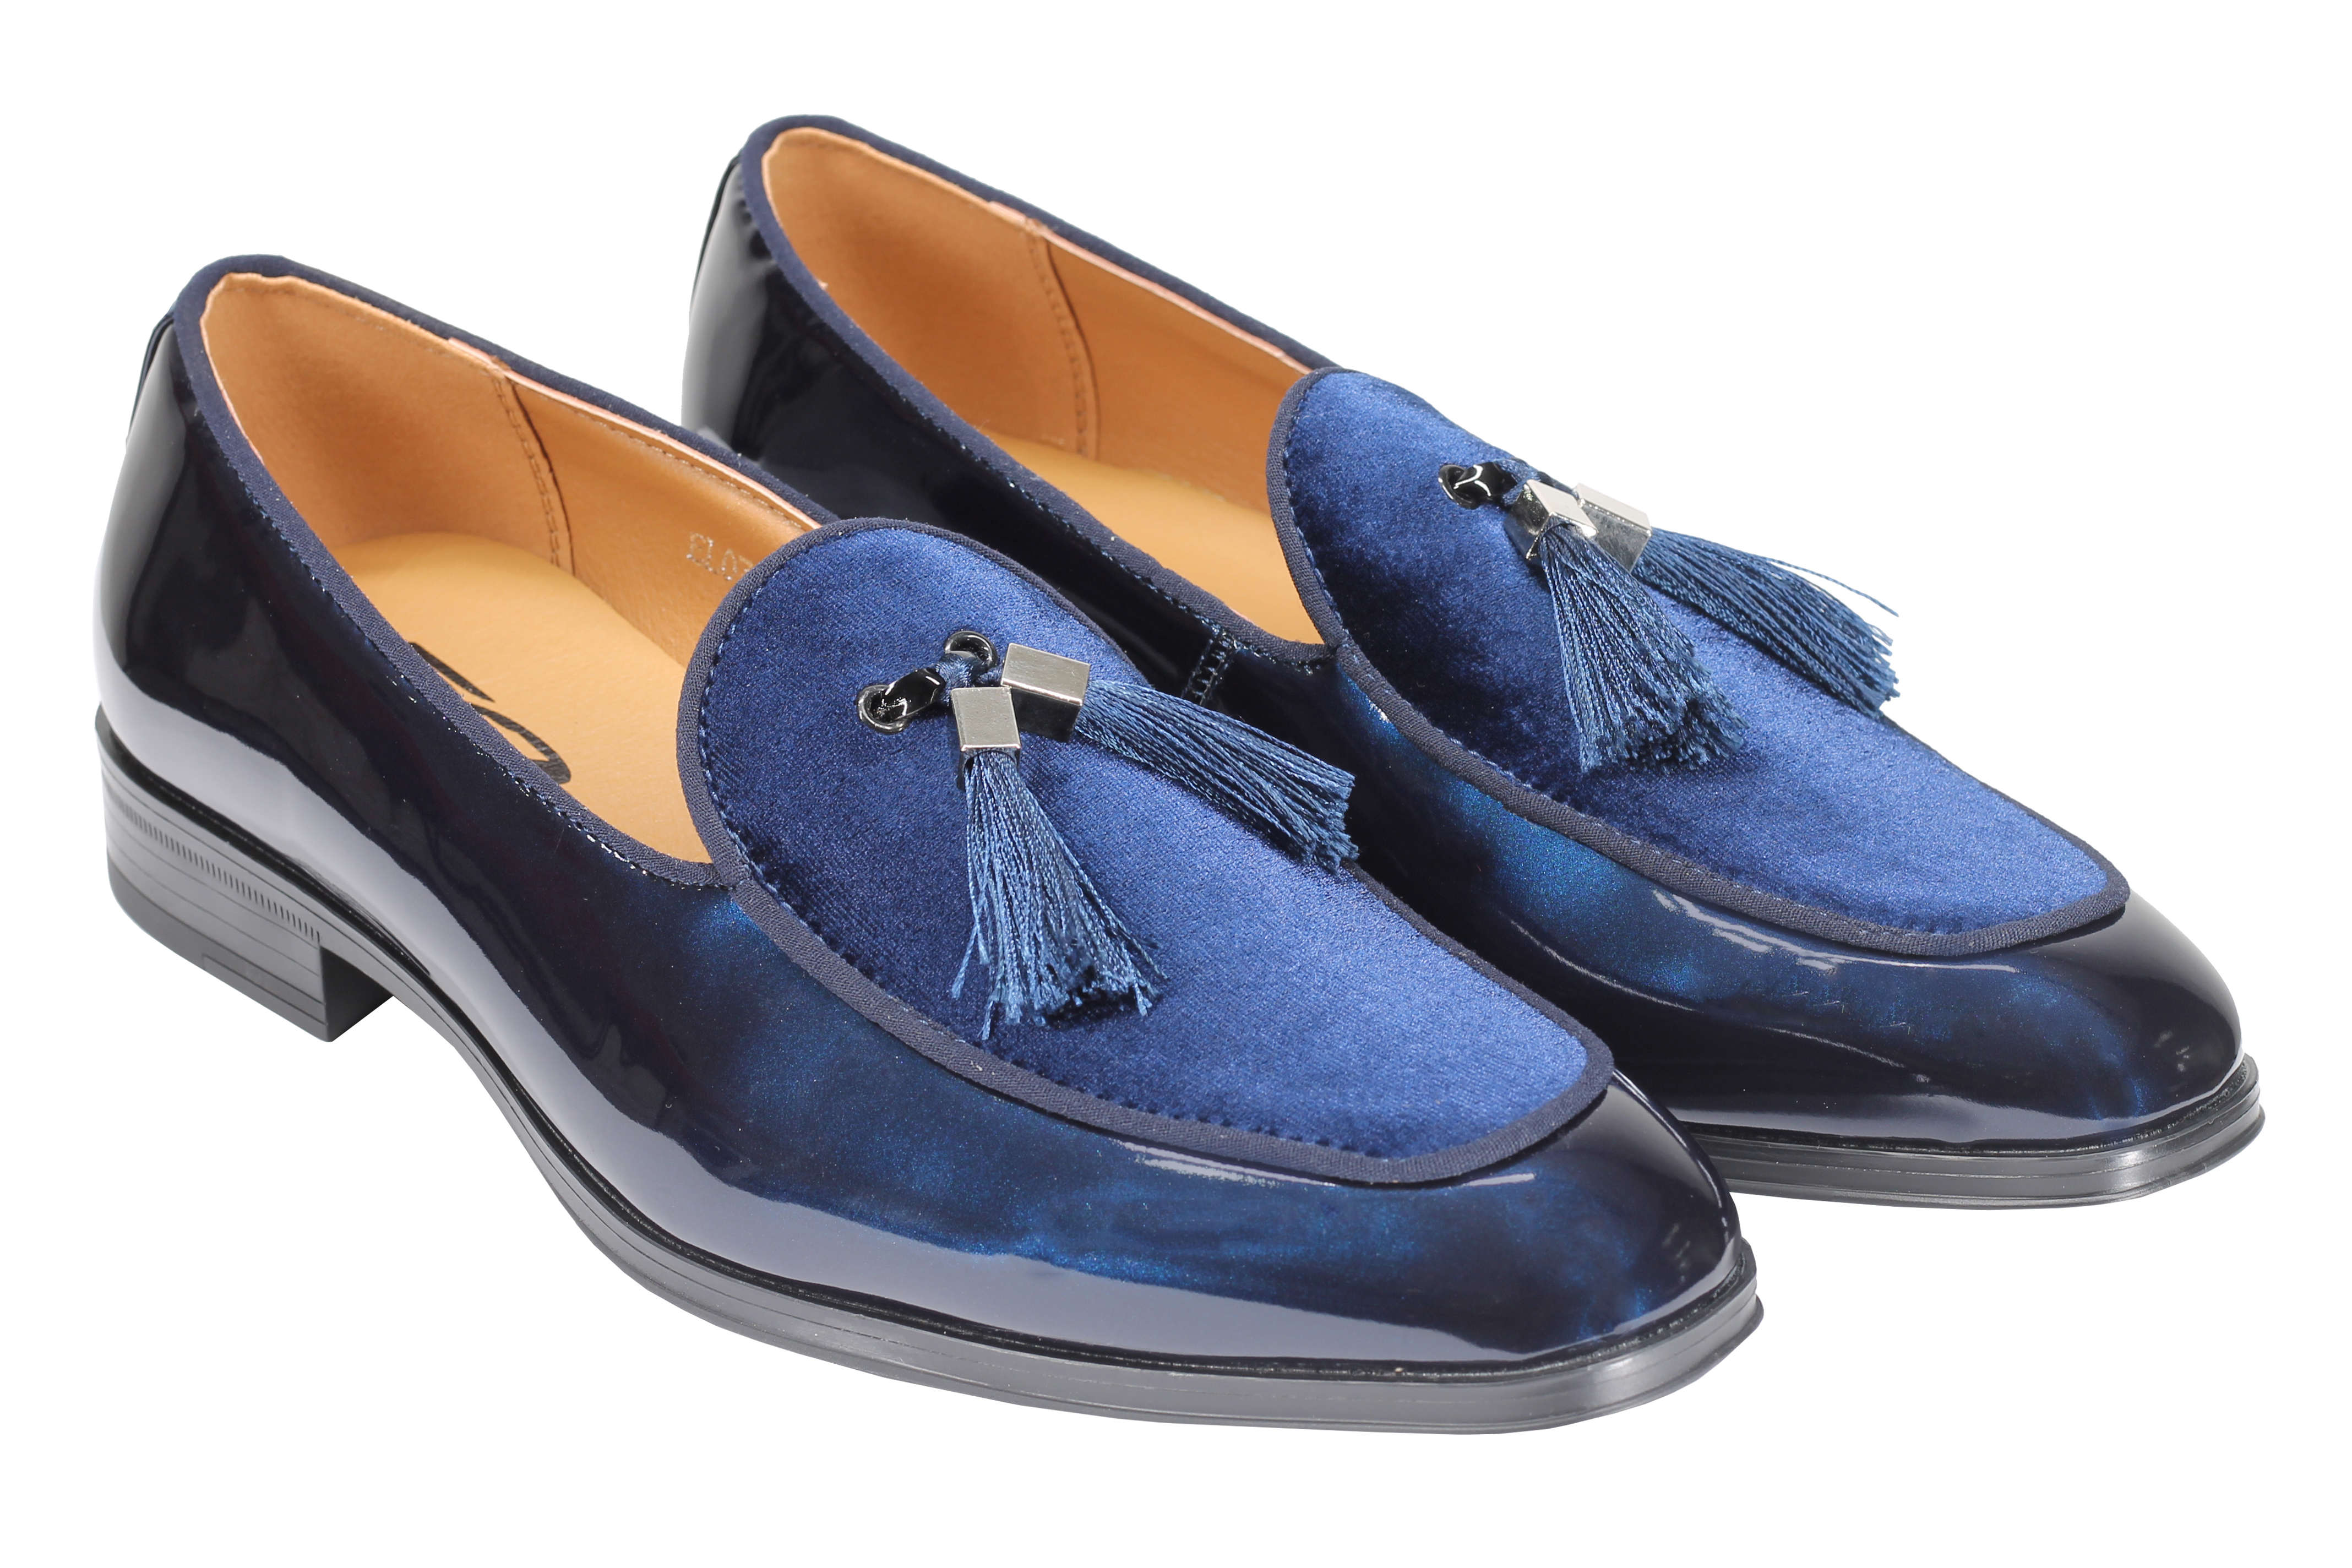 NAVY SHINY FAUX LEATHER TASSEL LOAFERS